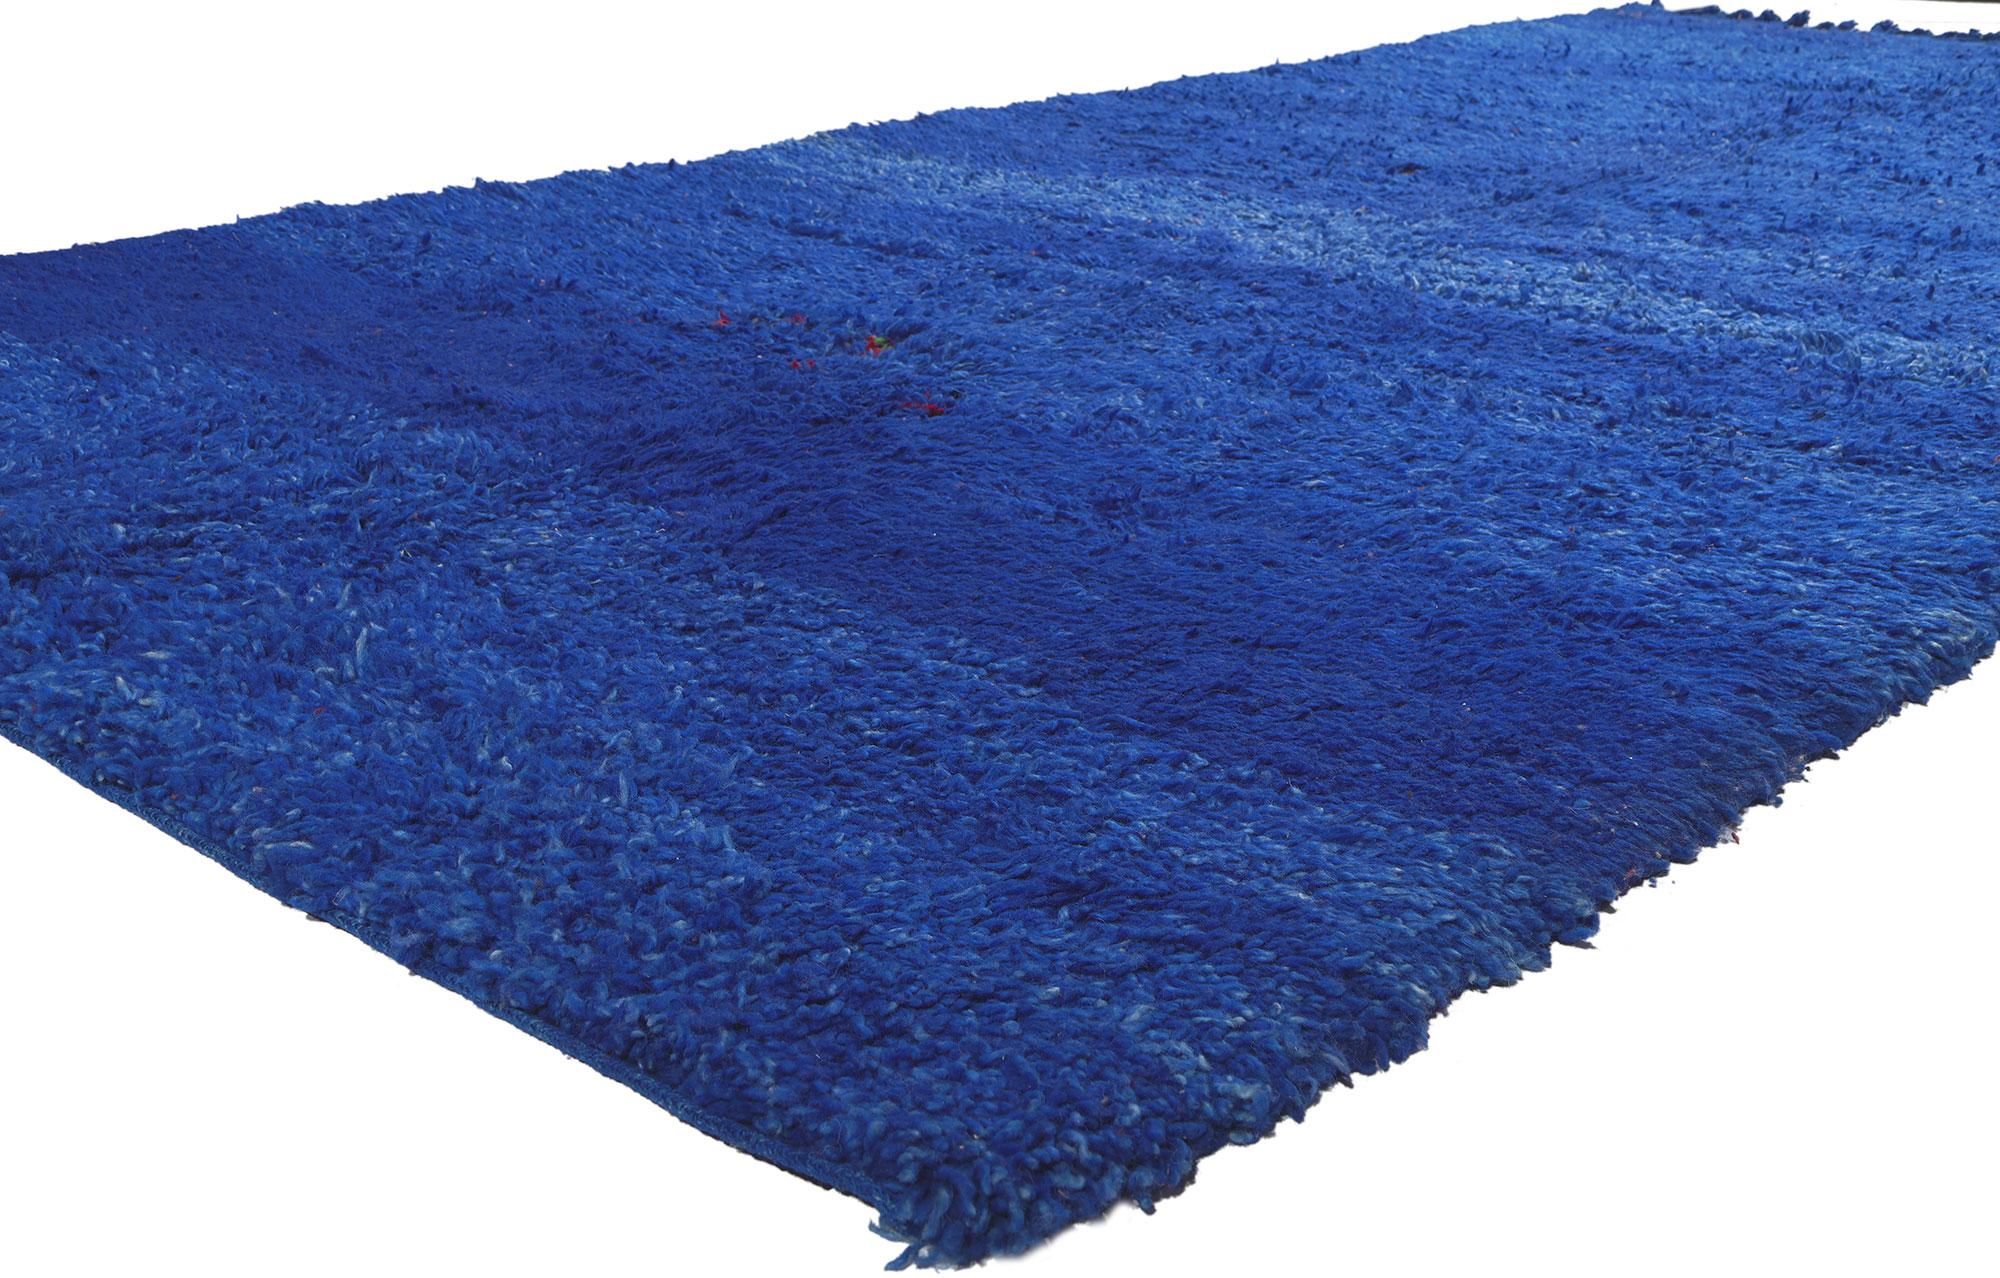 21019 Vintage Blue Beni MGuild Moroccan Rug, 06'03 x 13'02. Let yourself be whisked away on a cozy nomadic journey, as you step onto this mesmerizing hand-knotted wool vintage Beni MGuild Moroccan rug. This magical carpet ride will transport you to